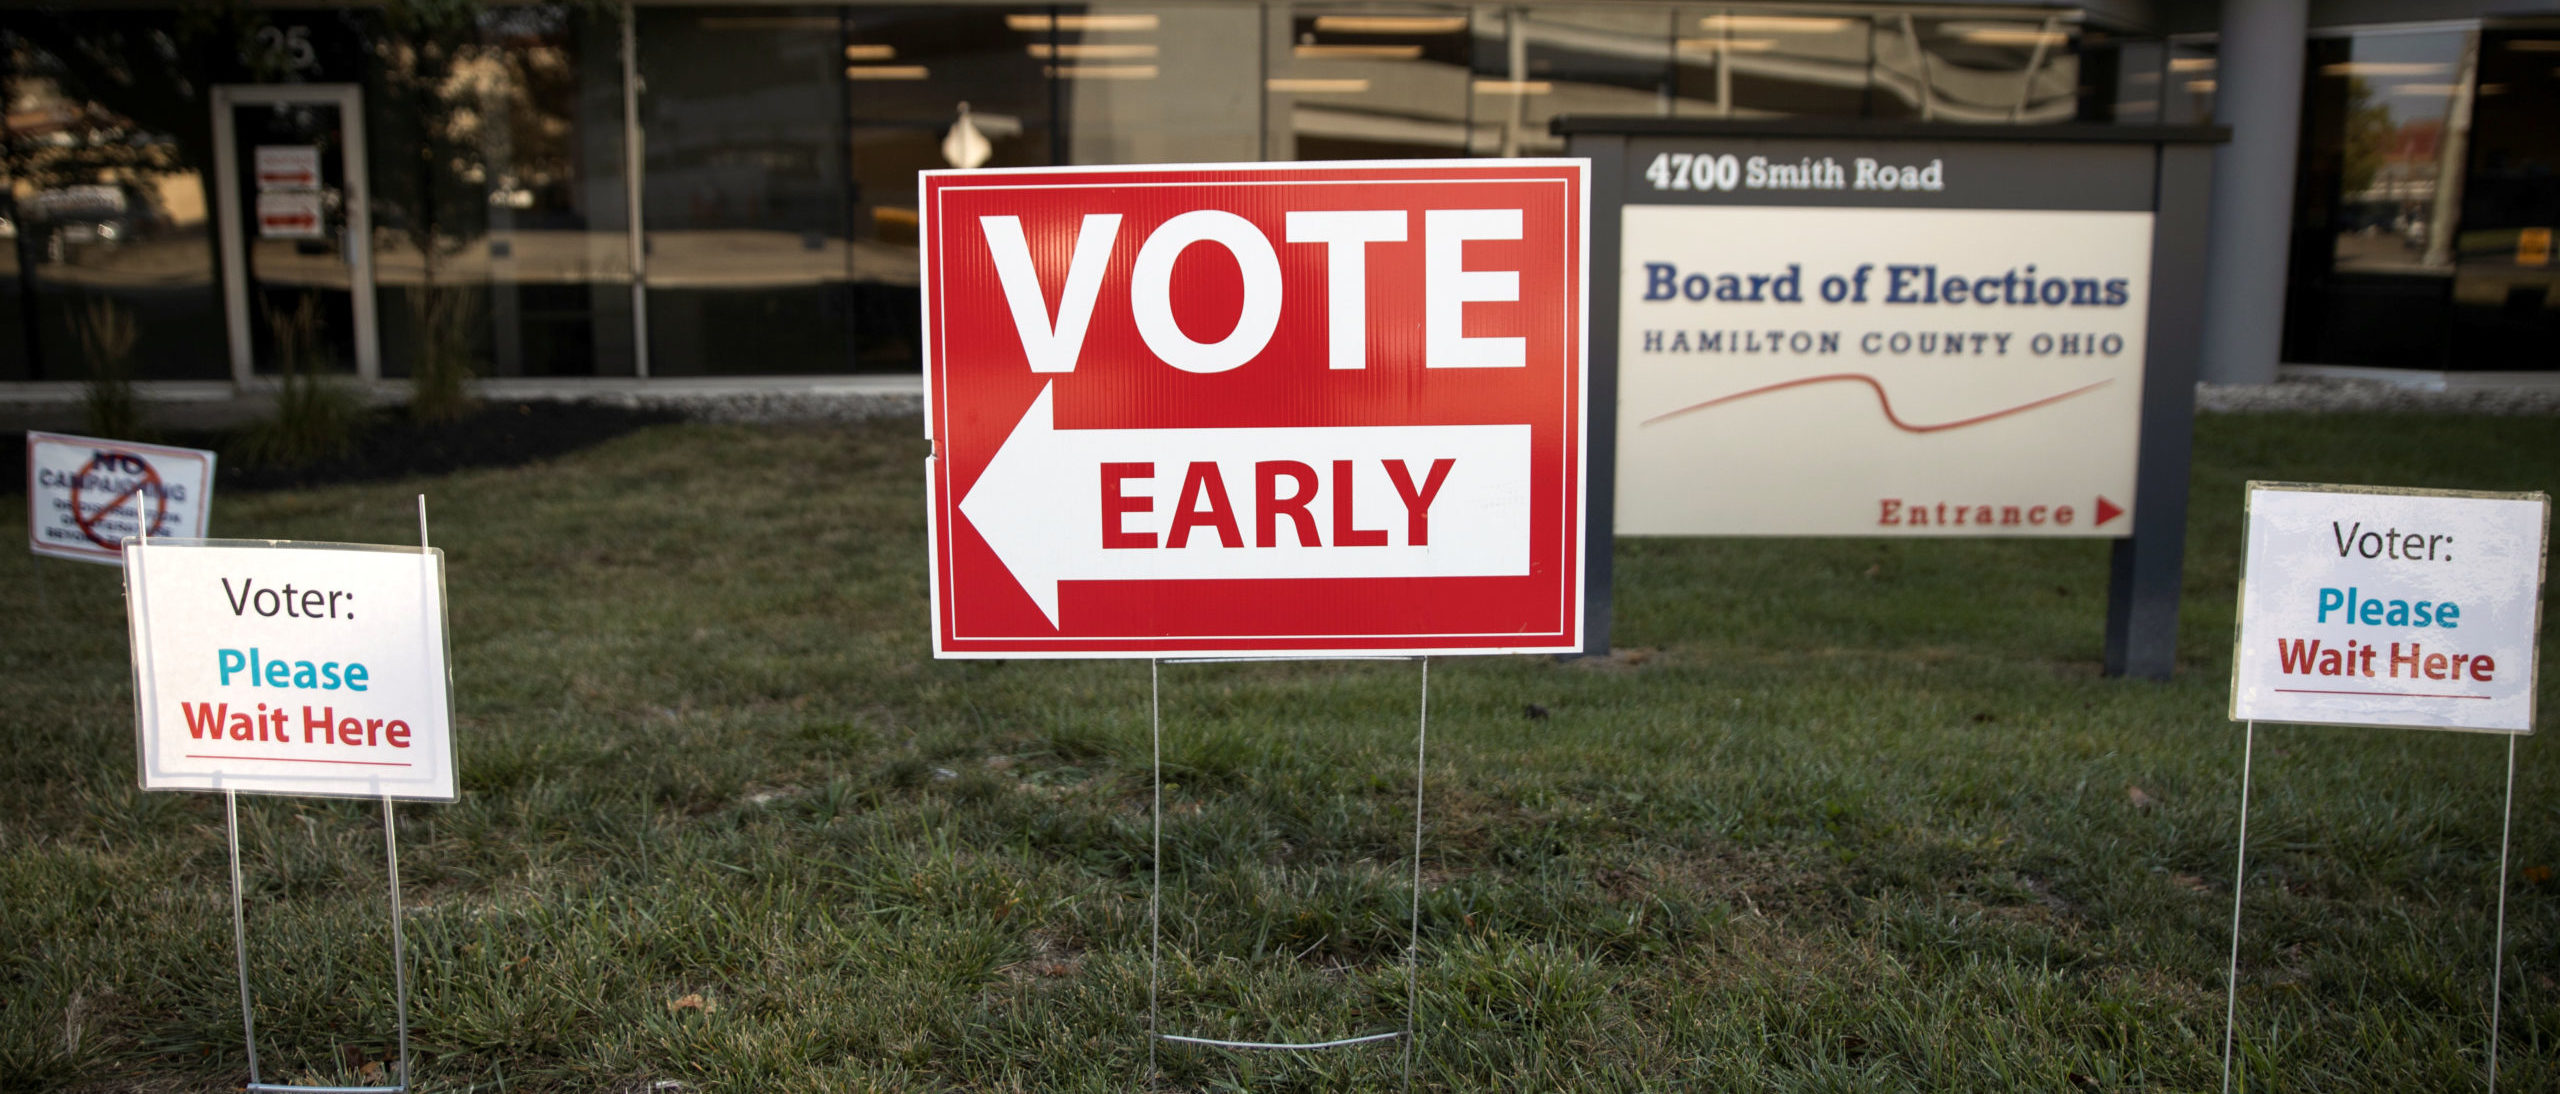 Early voting signs are placed outside of the Hamilton County Board of Elections building for the upcoming presidential election, as early voting begins in Cincinnati, Ohio, U.S., October 6, 2020. REUTERS/Megan Jelinger